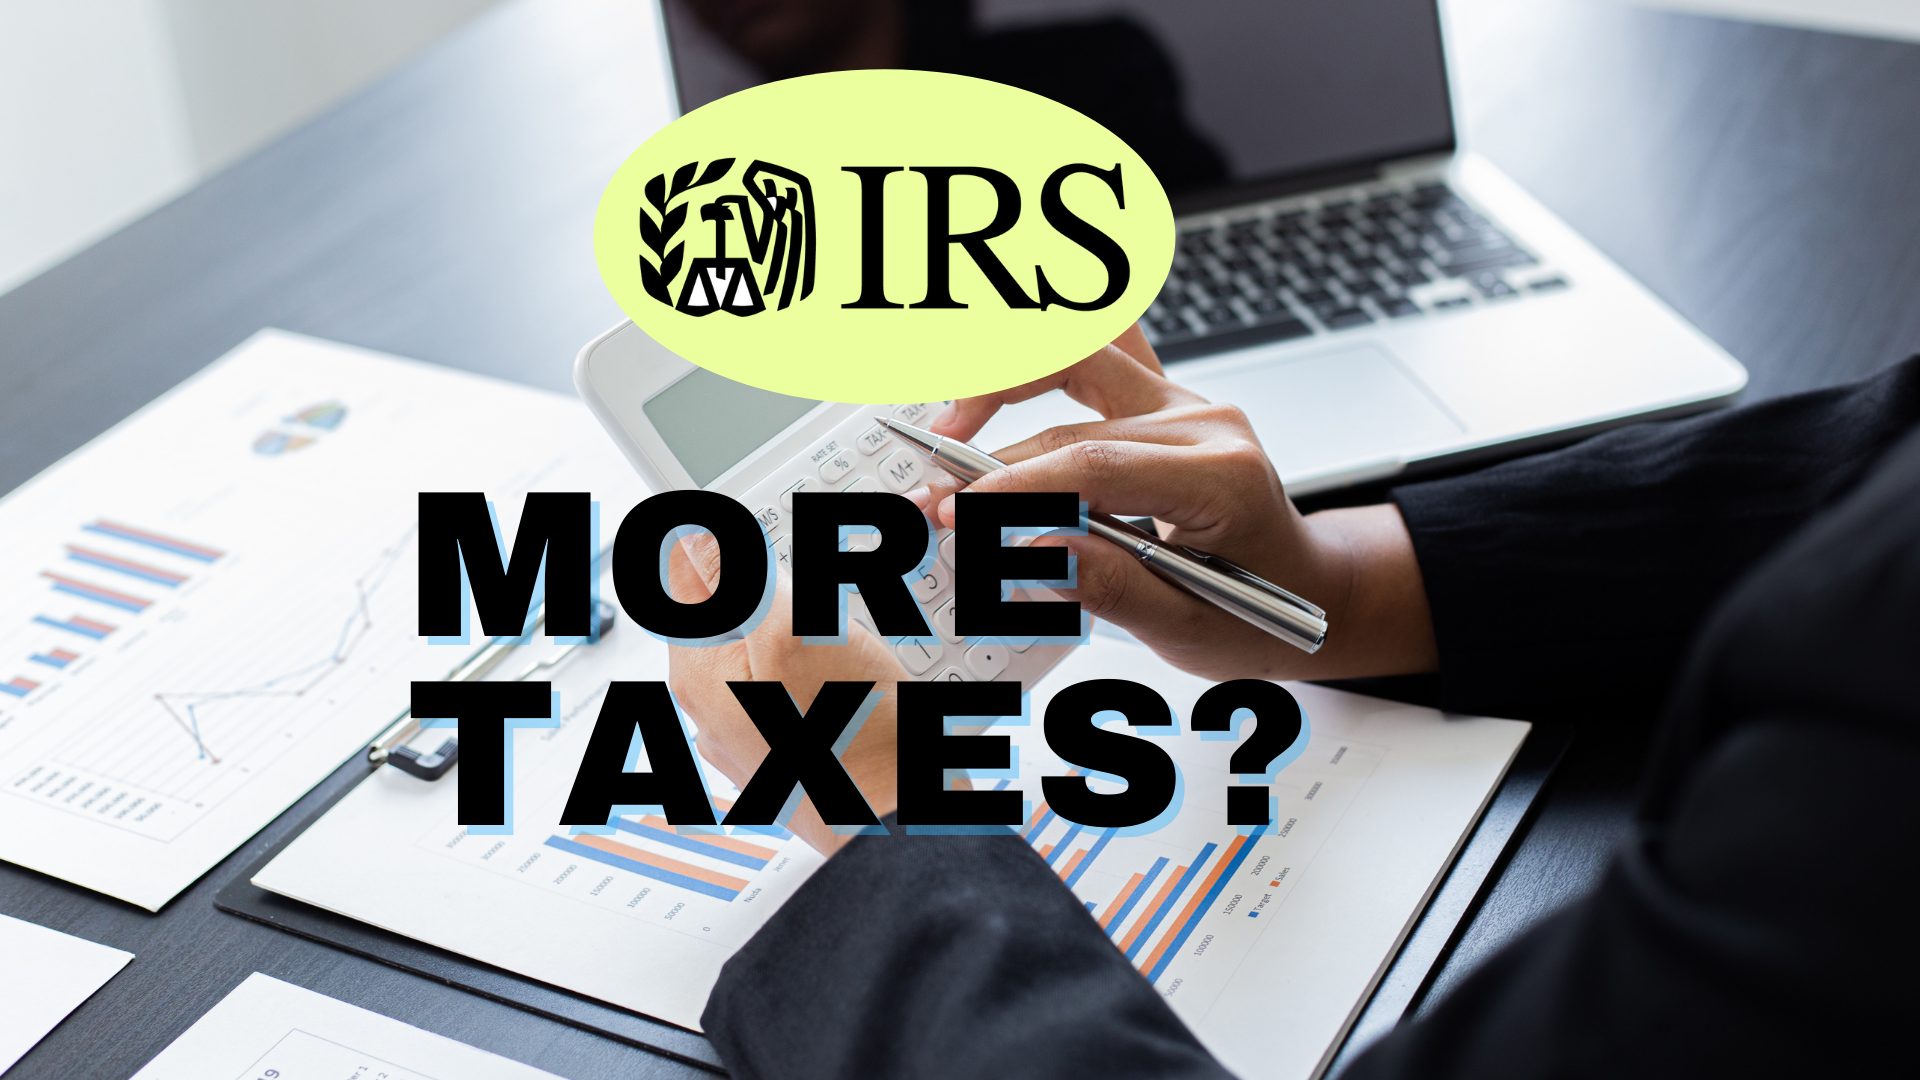 New IRS 600 Reporting Rule More Taxes on Small Business & Side